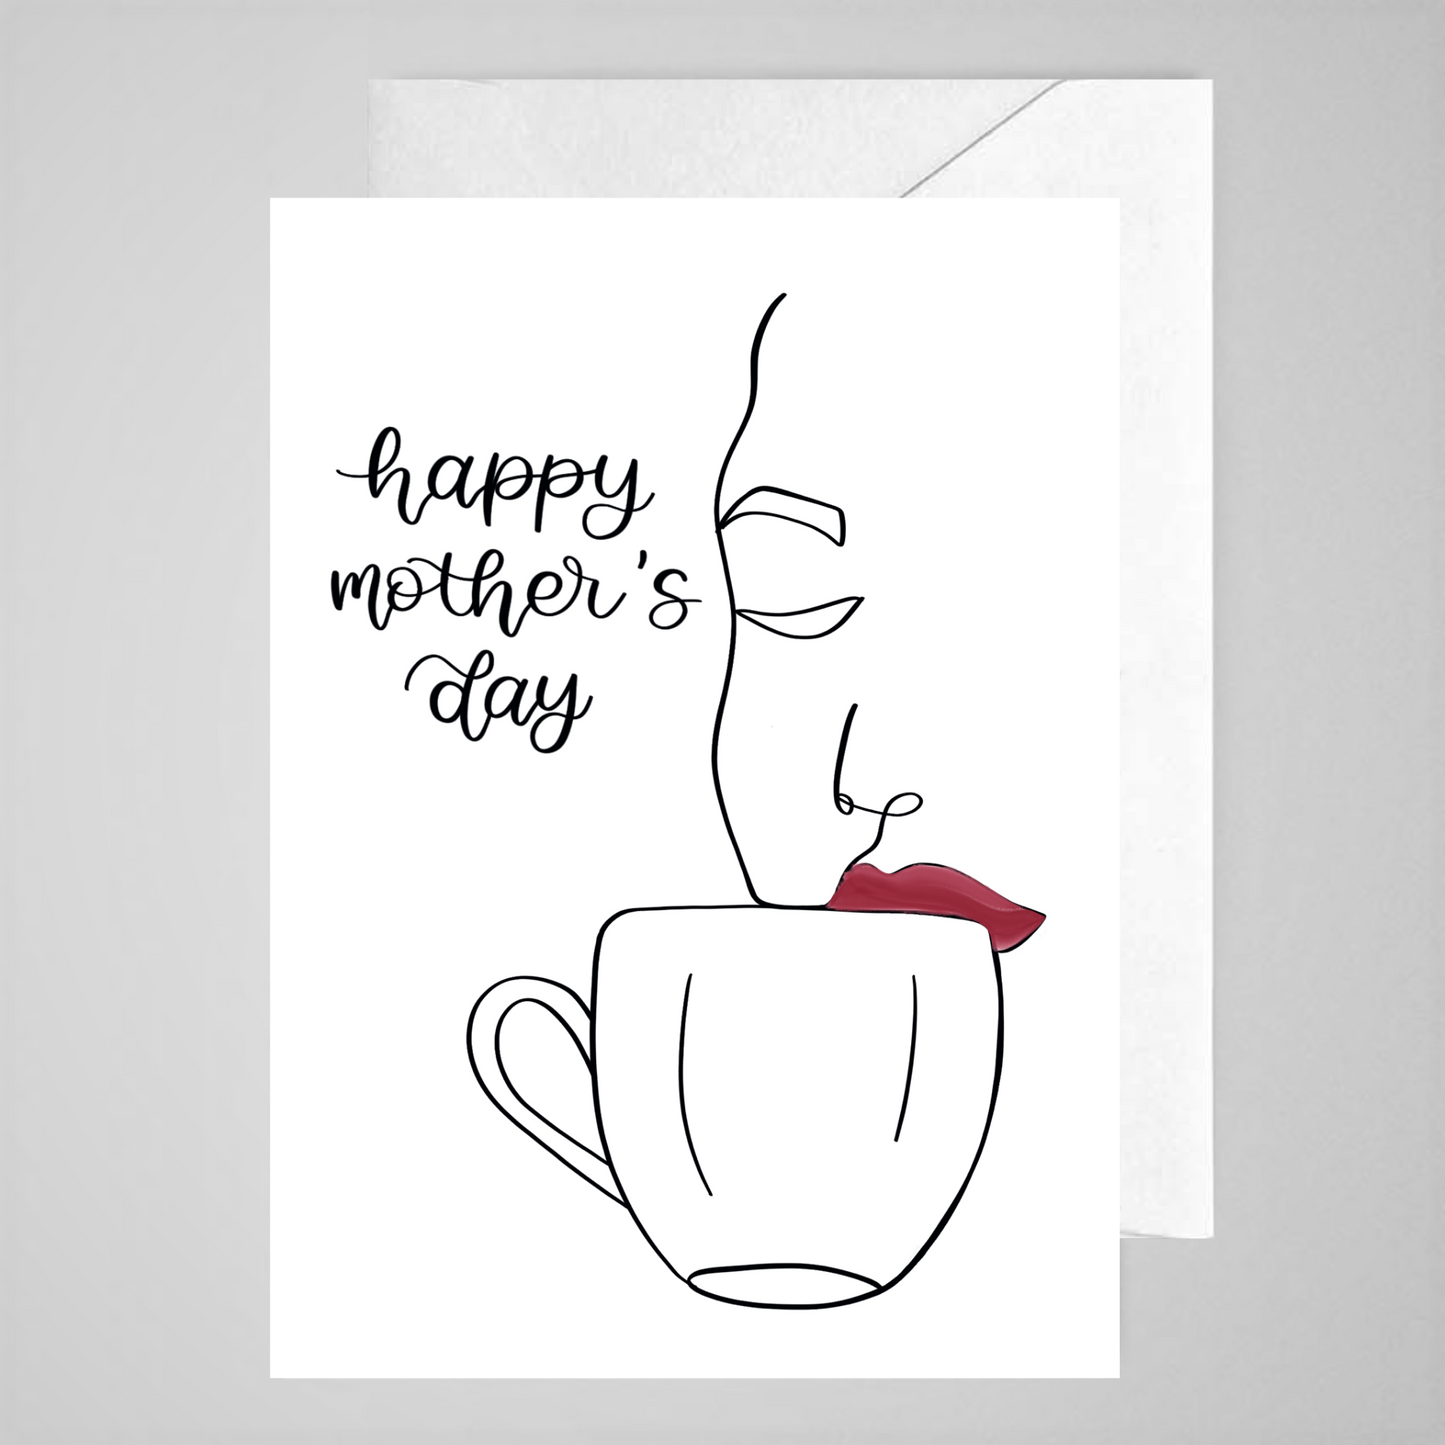 Happy Mother's Day (line drawing) - Greeting Card